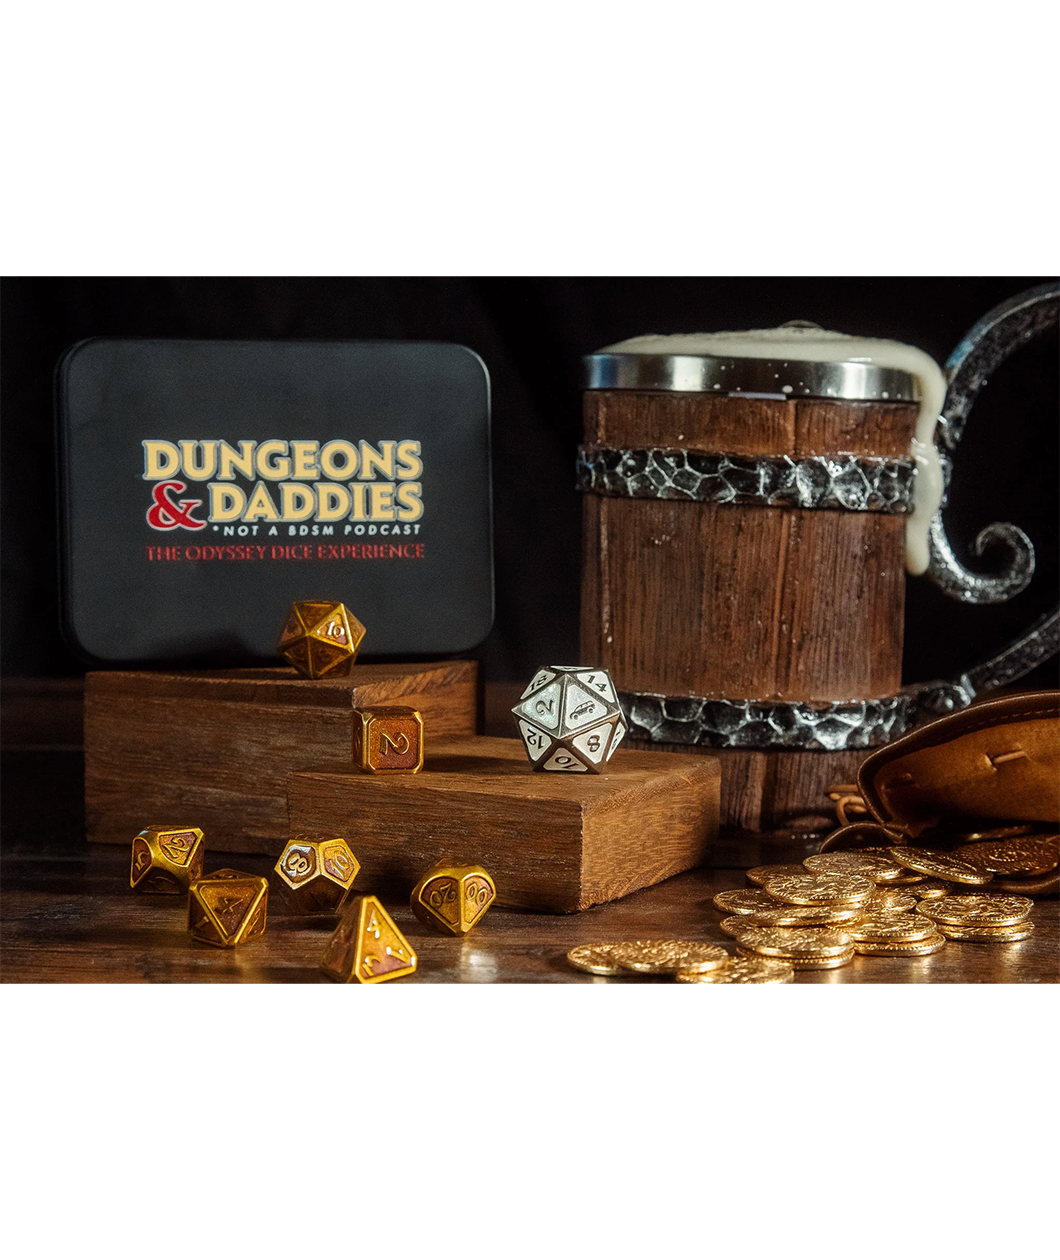 Black Dice holder with Dungeons & Daddies logo, tagline: Not a BDSM Podcast and the title of the Dice Set. Pirate themed set up with gold dice and Honda Odyssey white d20. Gold coins are also on the table with a wooden beer stein overflowing with foam behind them.